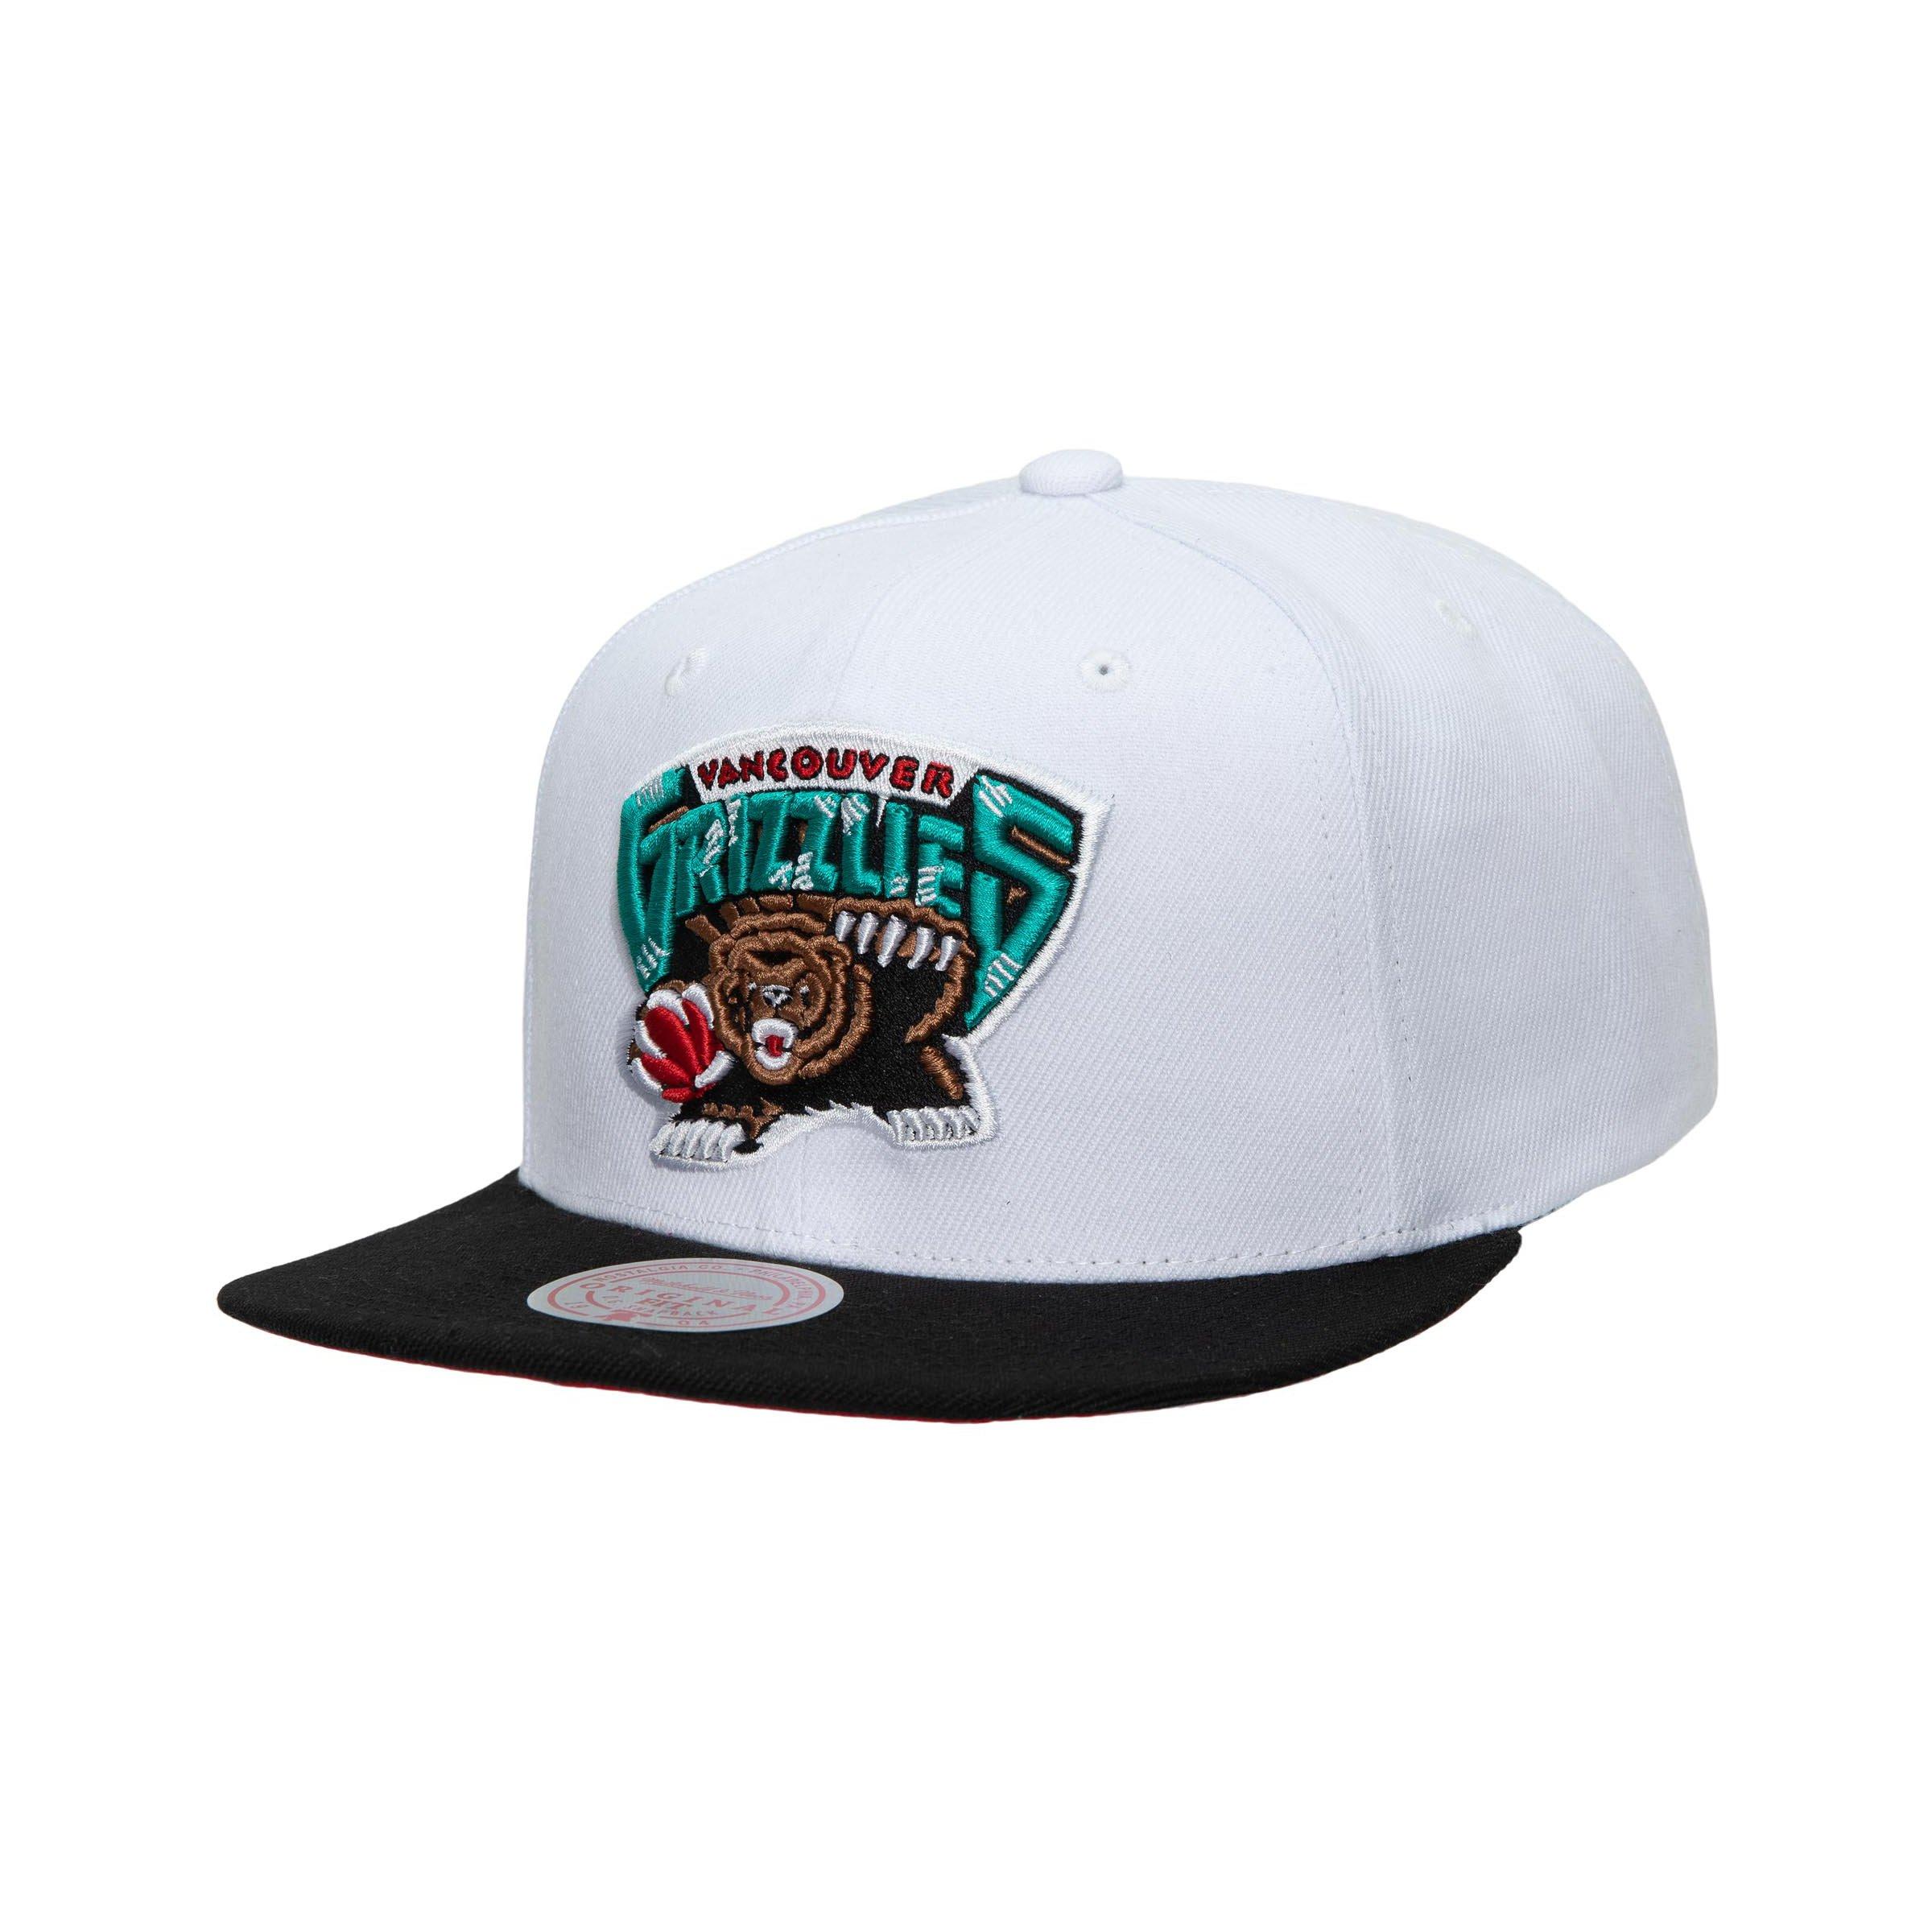 Vancouver Grizzlies Mitchell & Ness Core Snapback Hat